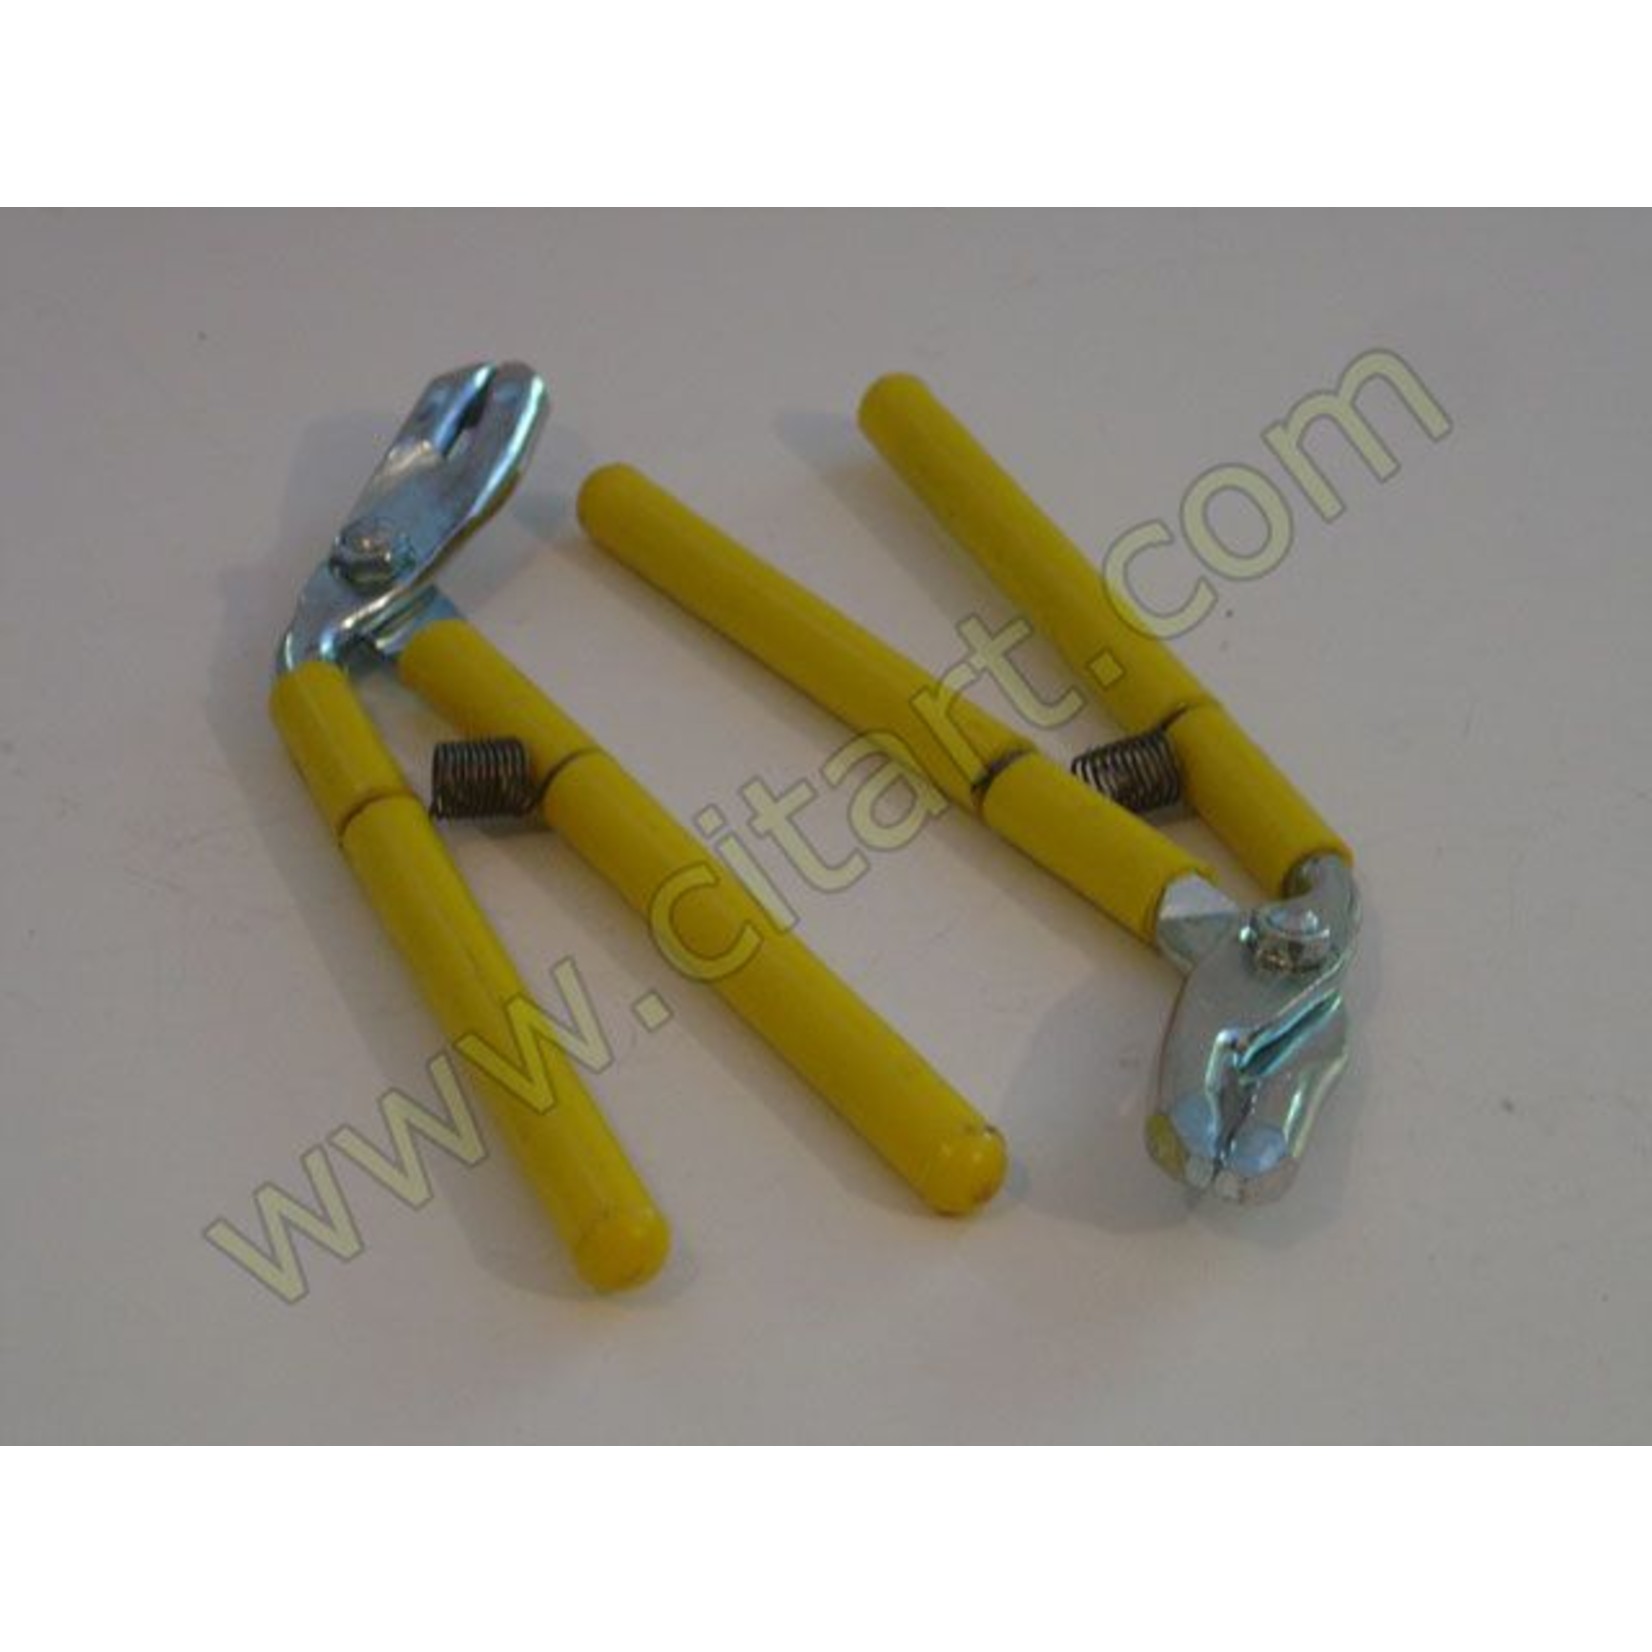 Pliers for upholstery works